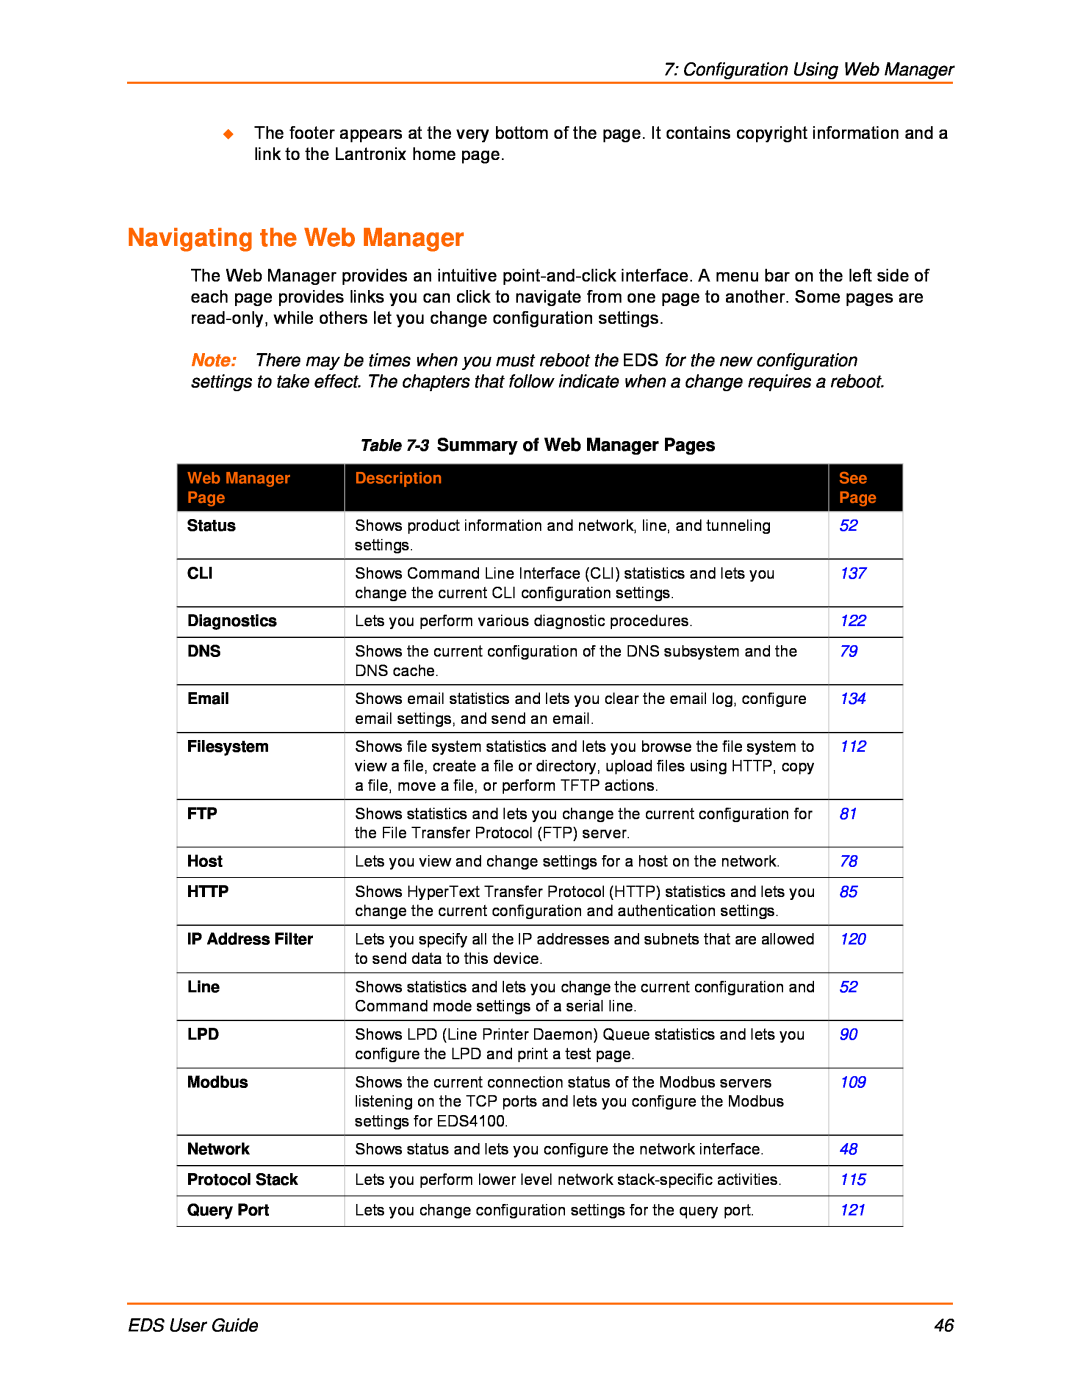 Lantronix EDS16PS, EDS32PR Navigating the Web Manager, Configuration Using Web Manager, 3 Summary of Web Manager Pages 